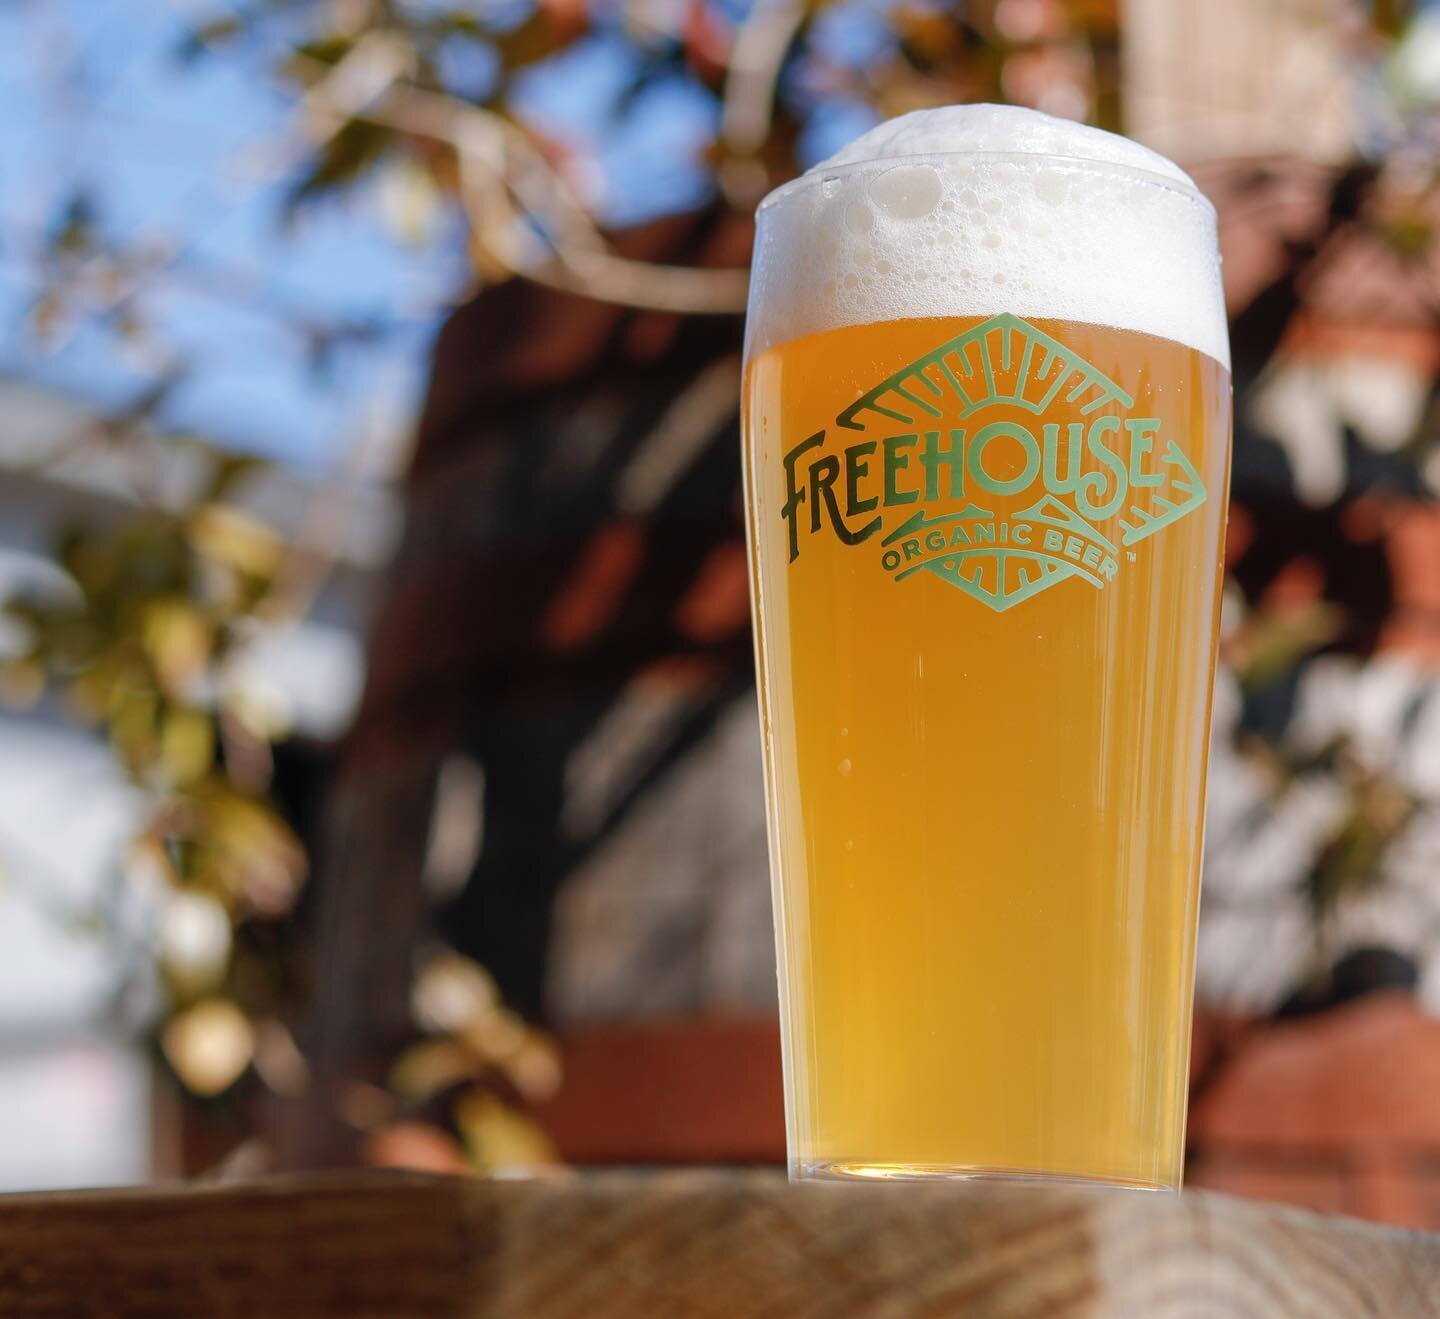 It&rsquo;s a beautiful day in the lowcountry!
Grab a beer enjoy the sunshine down by the river. 🍺 Don&rsquo;t forget to get your frequent flyer cards stamped for double-stamp Wednesday!

#OrganicBeer #TheNaturalChoice #FreehouseBeerCHS #SCBeer #CHSB